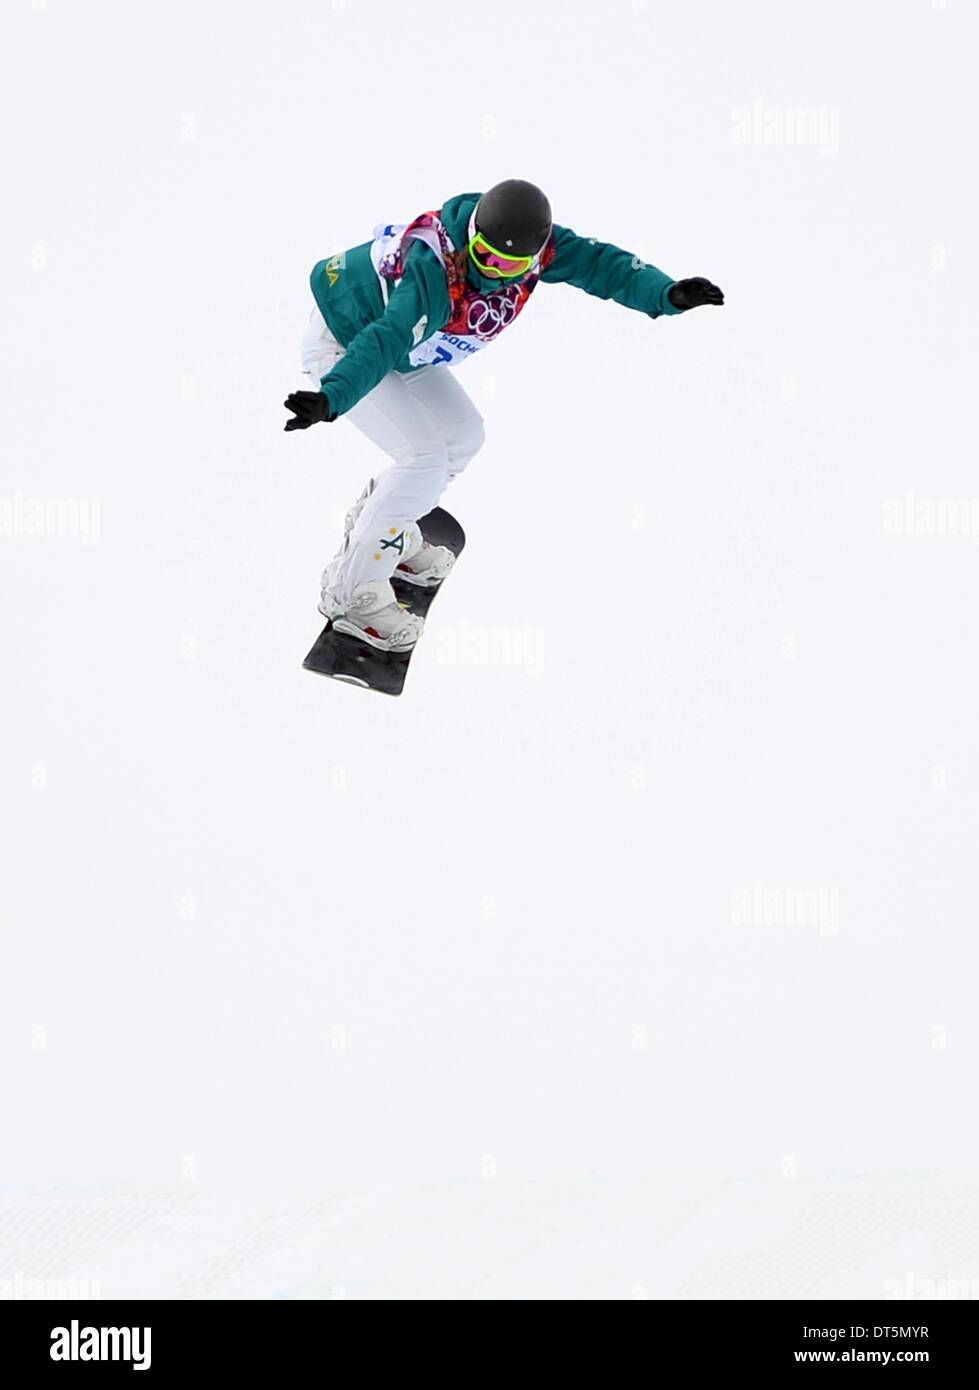 Sochi, Russia. 9th February 2014. Torah Bright (AUS). Womens Snowboard Slopestyle - final - Rosa Khutor Extreme Park - Sochi - Russia - 09/02/2014 Credit:  Sport In Pictures/Alamy Live News Stock Photo